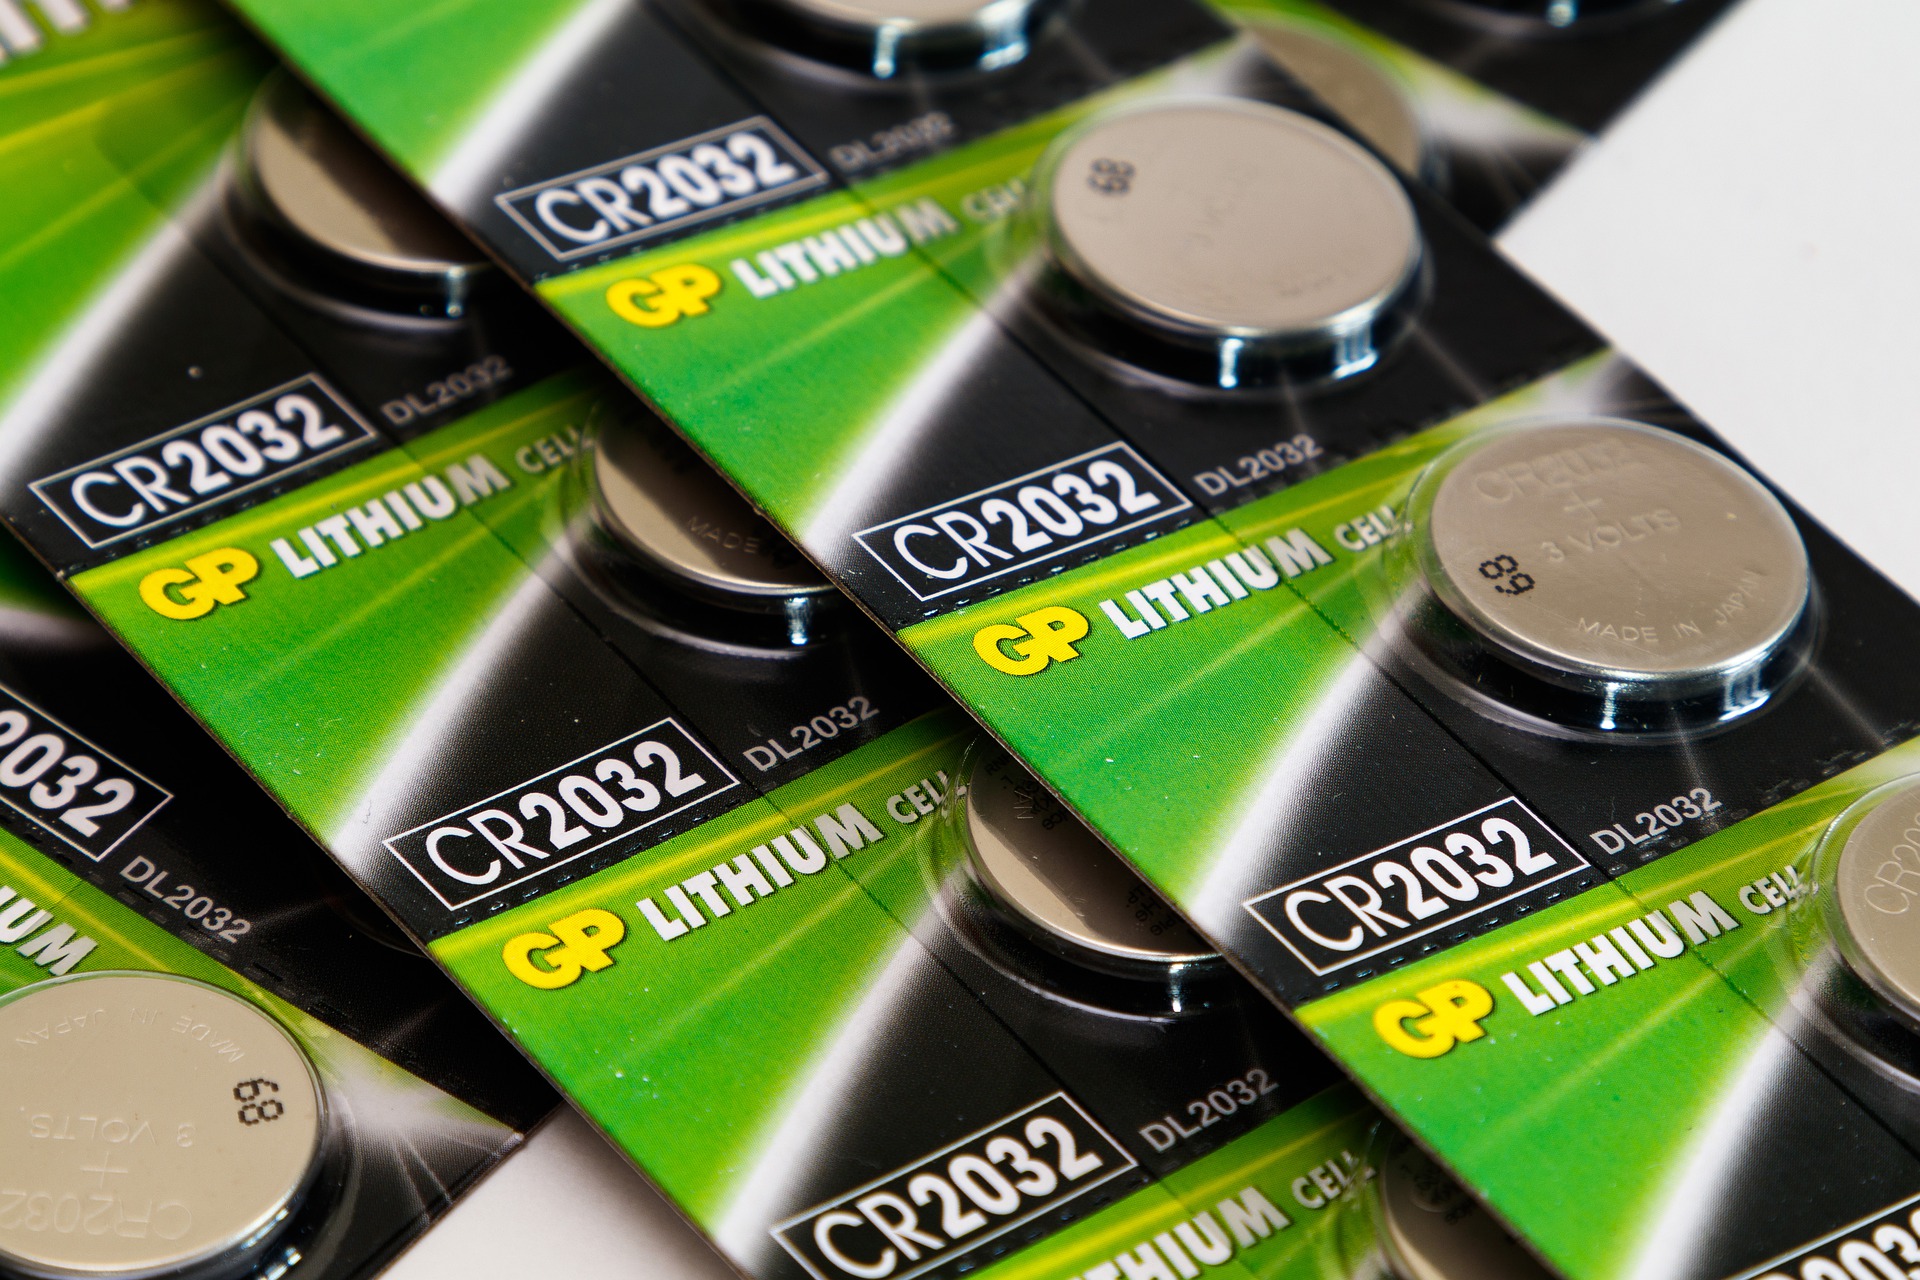 Small round disk batteries in green and black cardboard packaging that says 'GP Lithium'